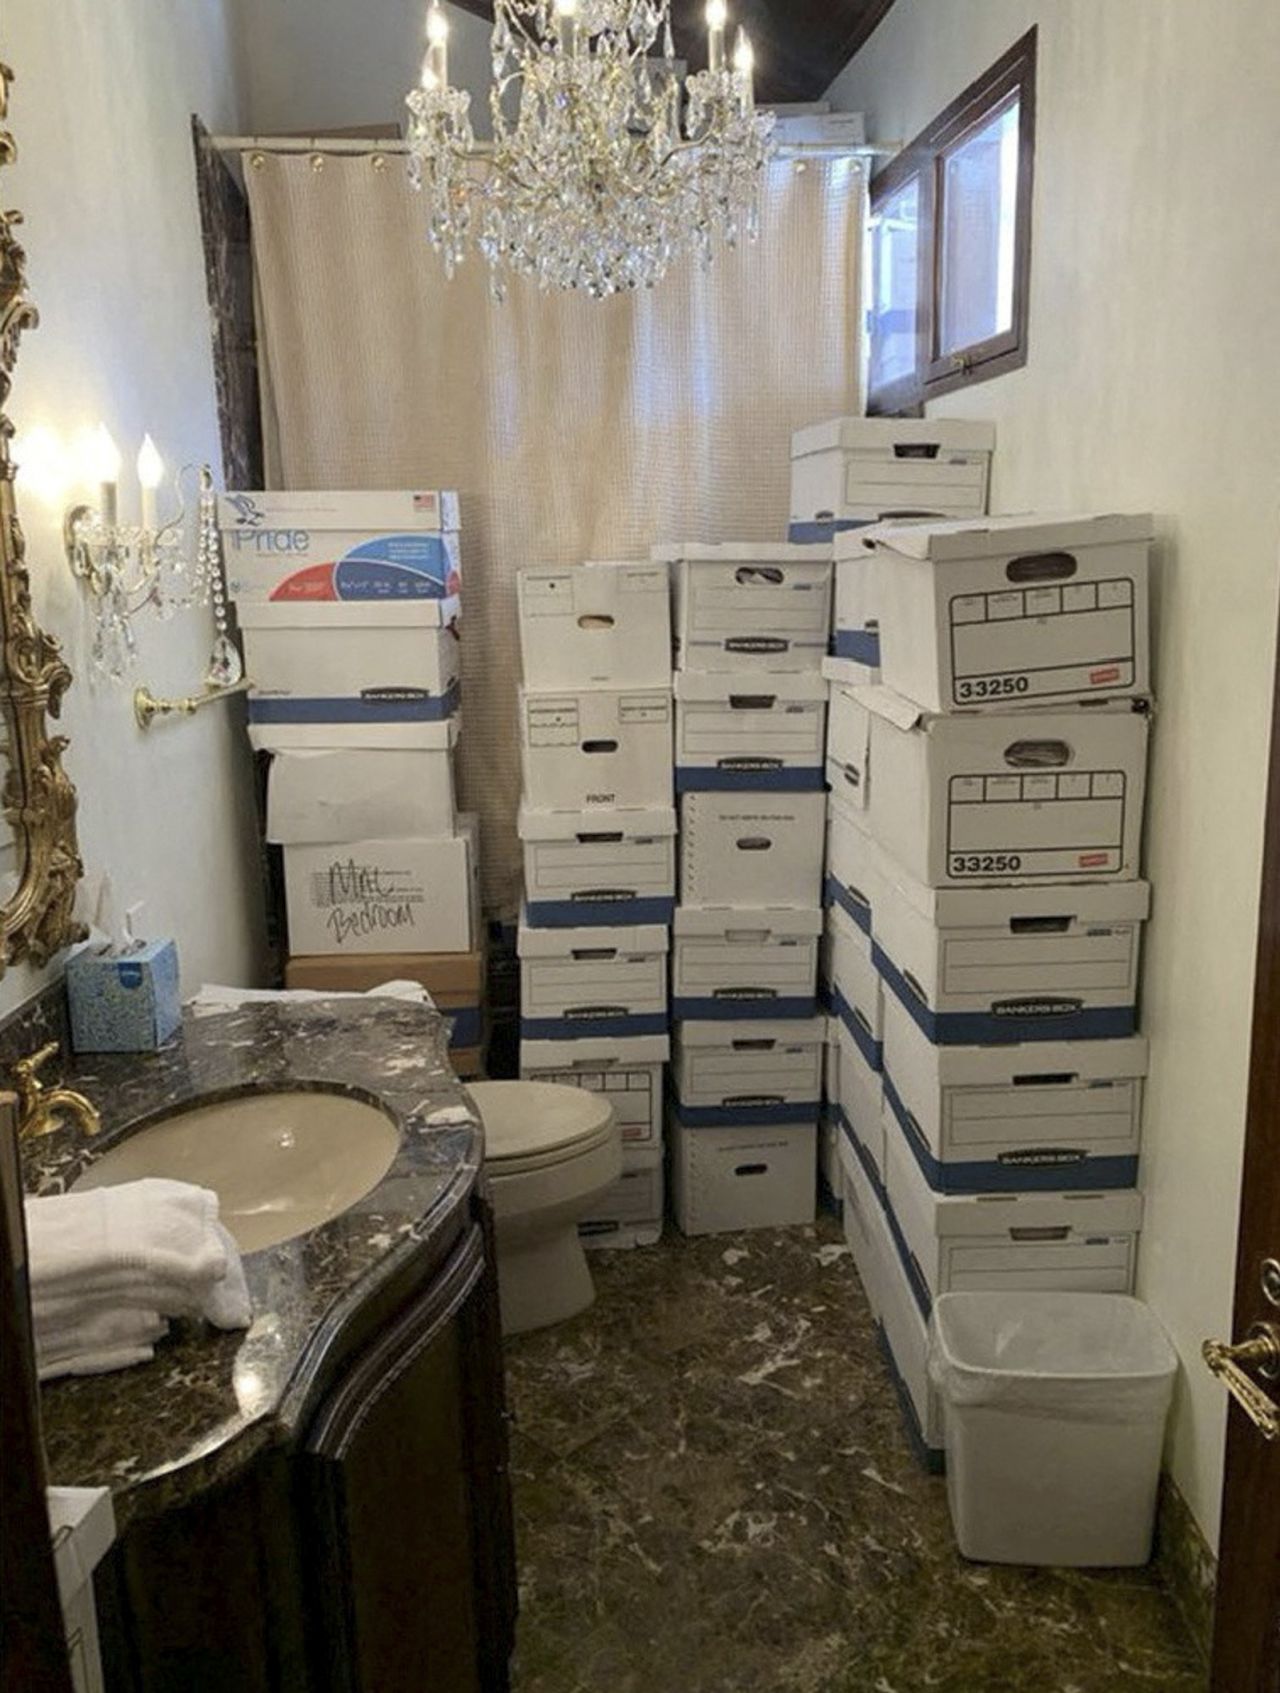 Boxes of documents are stored inside the Mar-a-Lago Club's Lake Room in this photo that was included in <a href="https://www.cnn.com/interactive/2023/06/politics/annotated-trump-indictment-dg/" target="_blank">Donald Trump's federal indictment</a>, which was unsealed on Friday, June 9. The former president <a href="https://www.cnn.com/2023/06/09/politics/heres-where-donald-trump-allegedly-kept-classified-documents-at-mar-a-lago/index.html" target="_blank">allegedly kept classified documents at various places in his Mar-a-Lago resort</a>, including a public ballroom, bathroom and a bedroom, according to the indictment.